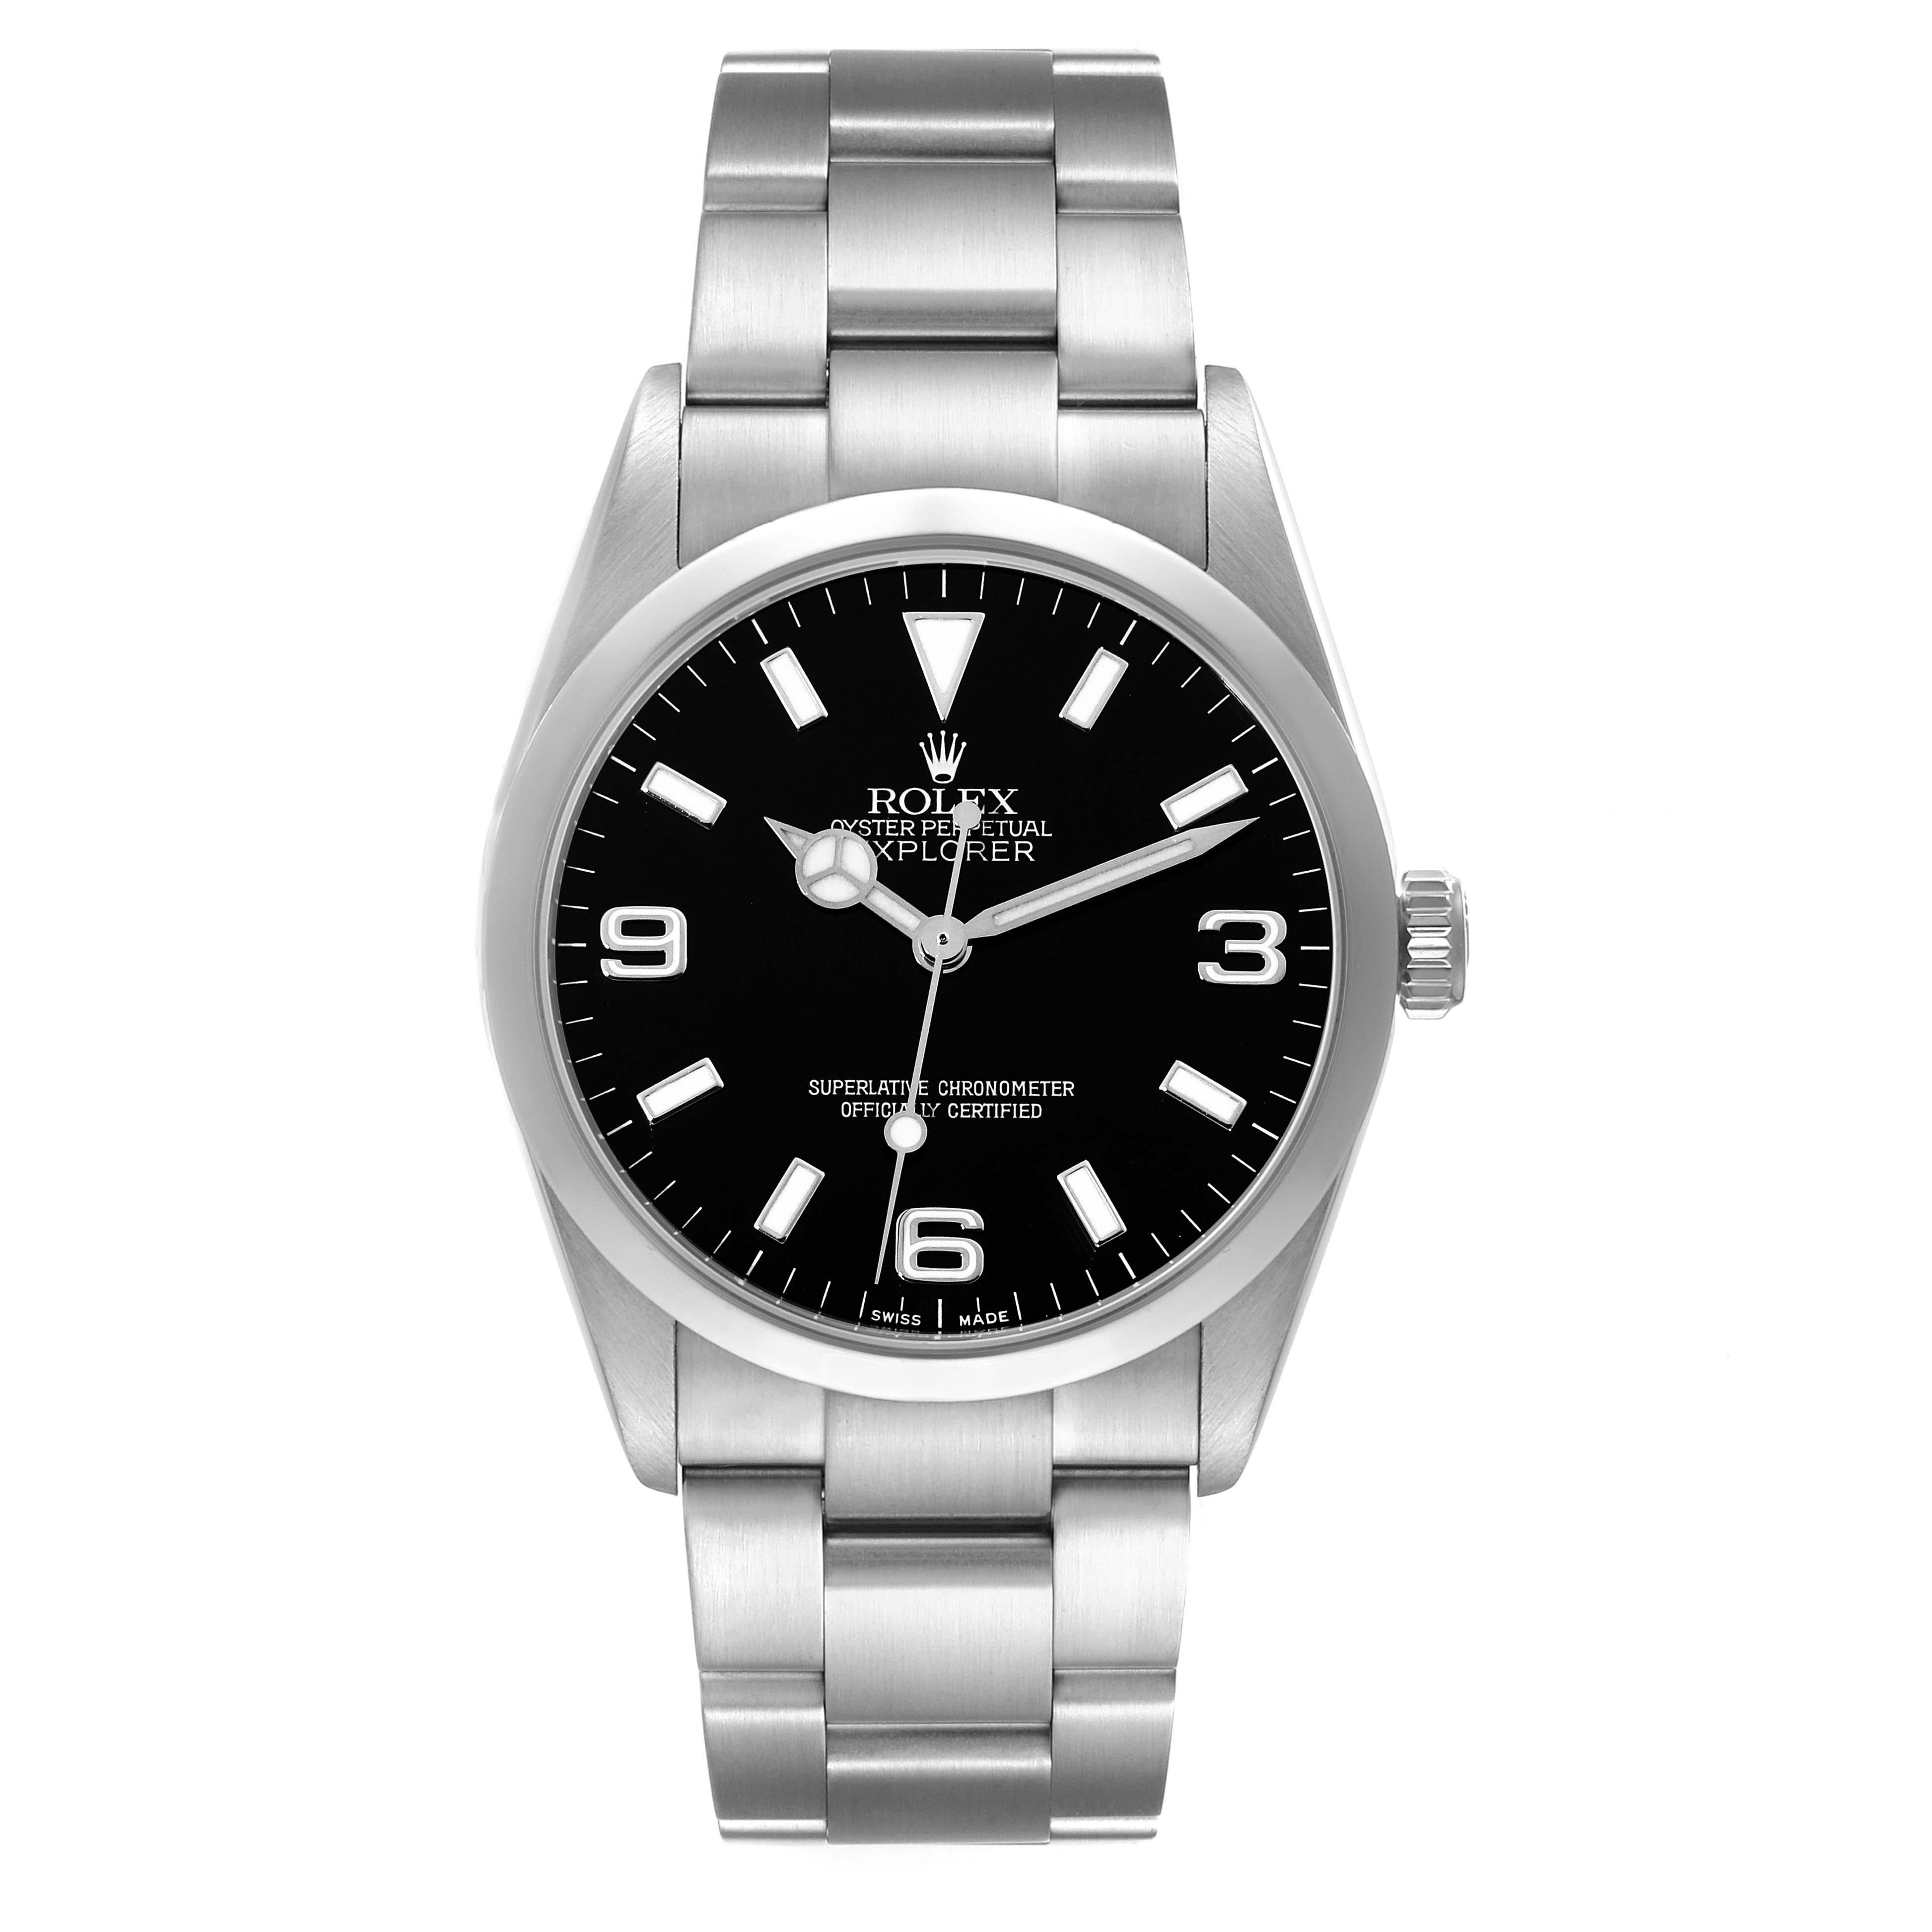 Rolex Explorer I Black Dial Steel Mens Watch 114270 Box Papers. Officially certified chronometer automatic self-winding movement. Stainless steel case 36.0 mm in diameter. Rolex logo on the crown. Stainless steel smooth bezel. Scratch resistant